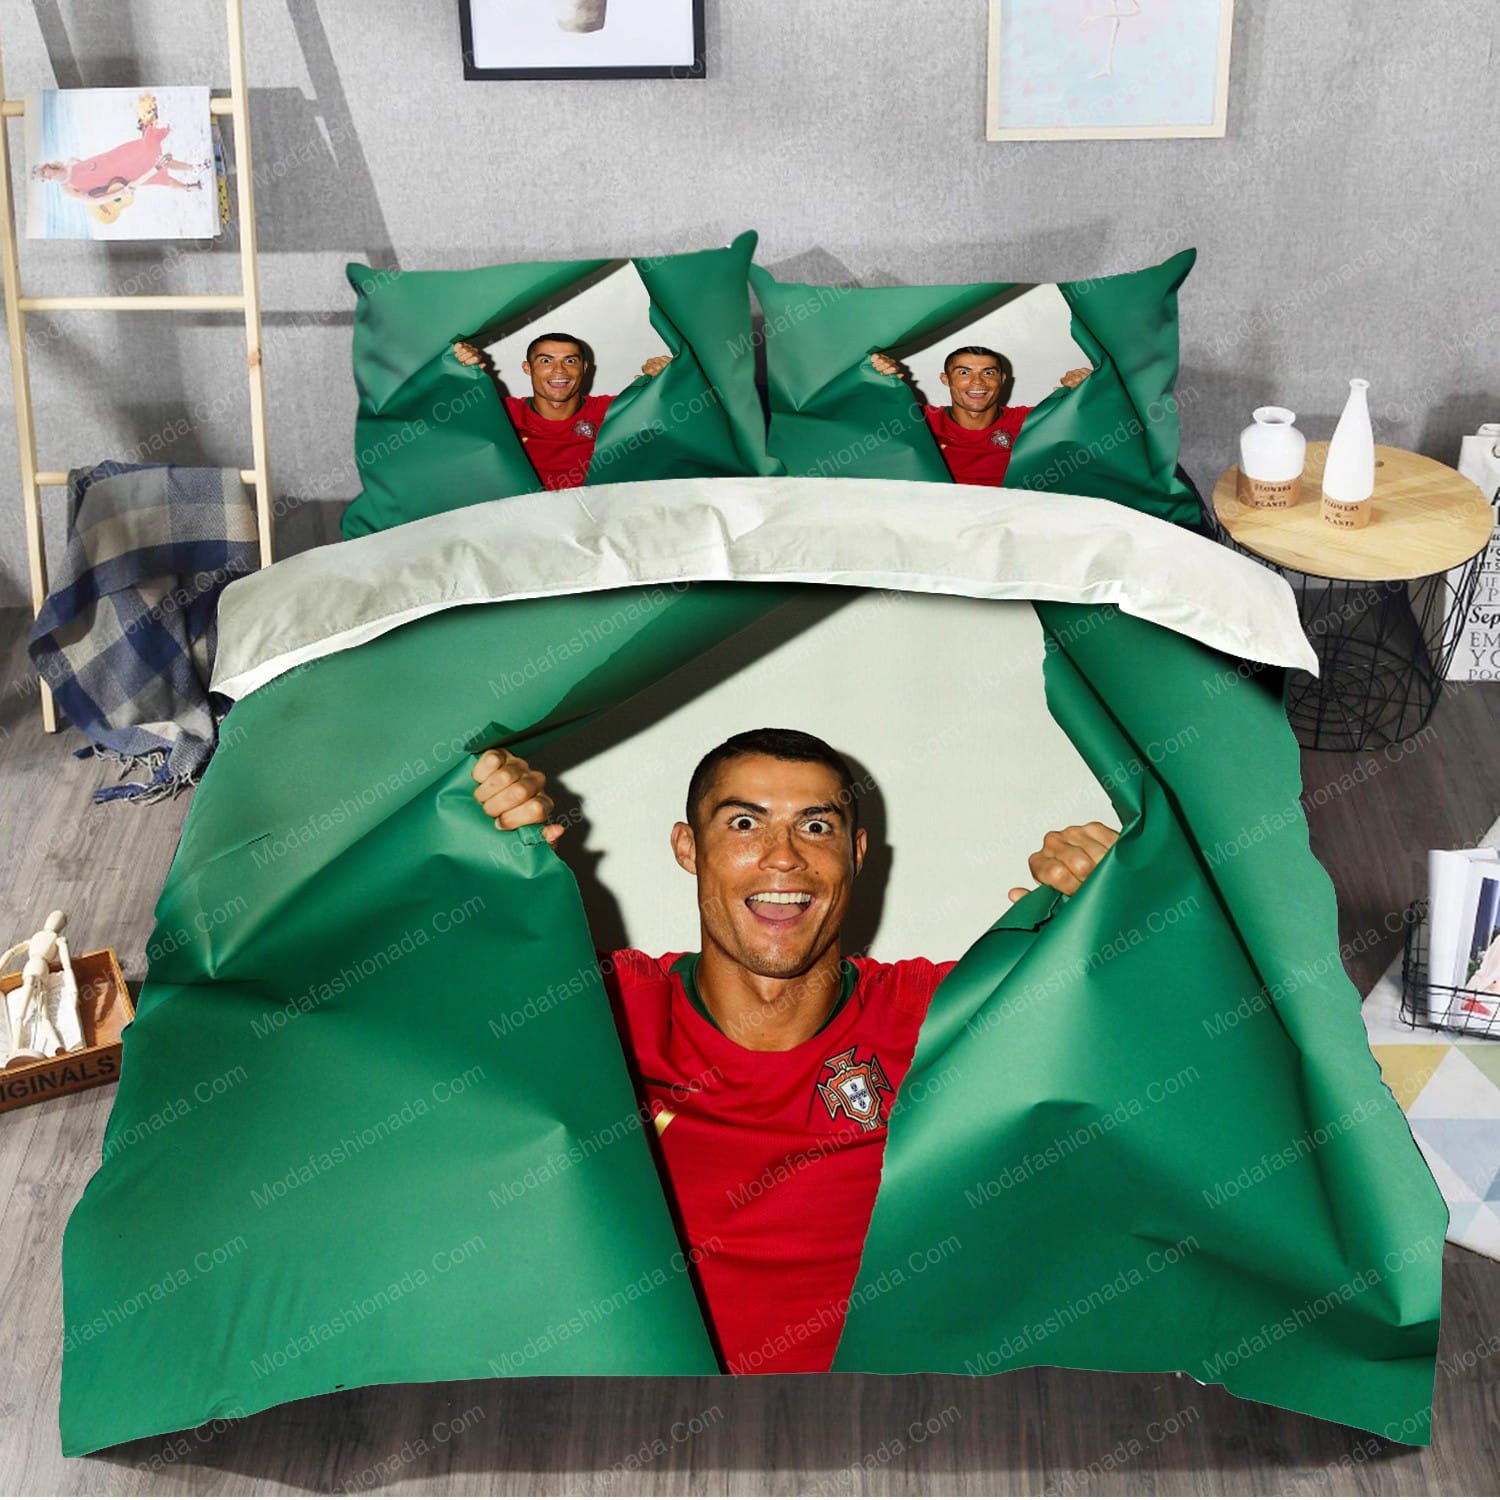 Funny Face Of Football Player Cristiano Ronaldo On A Green Background Soccer Player 7 Bedding Set